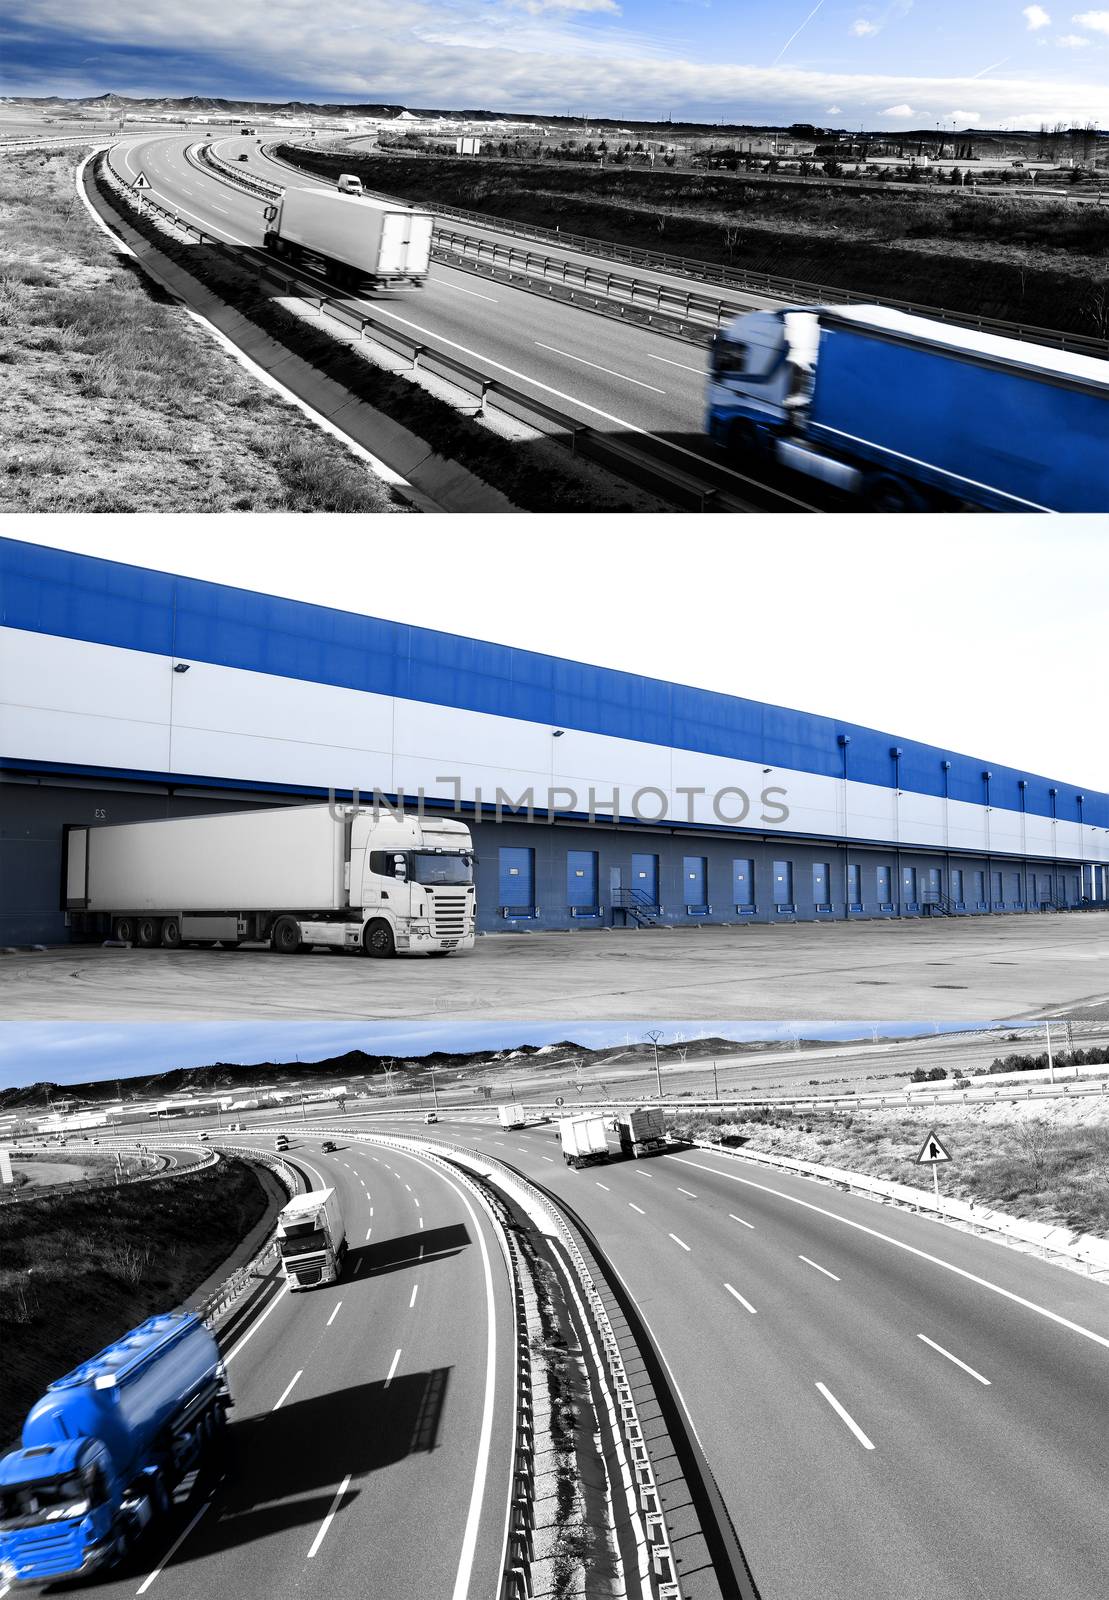 Trucks and transport. Highway and delivering.Warehouse